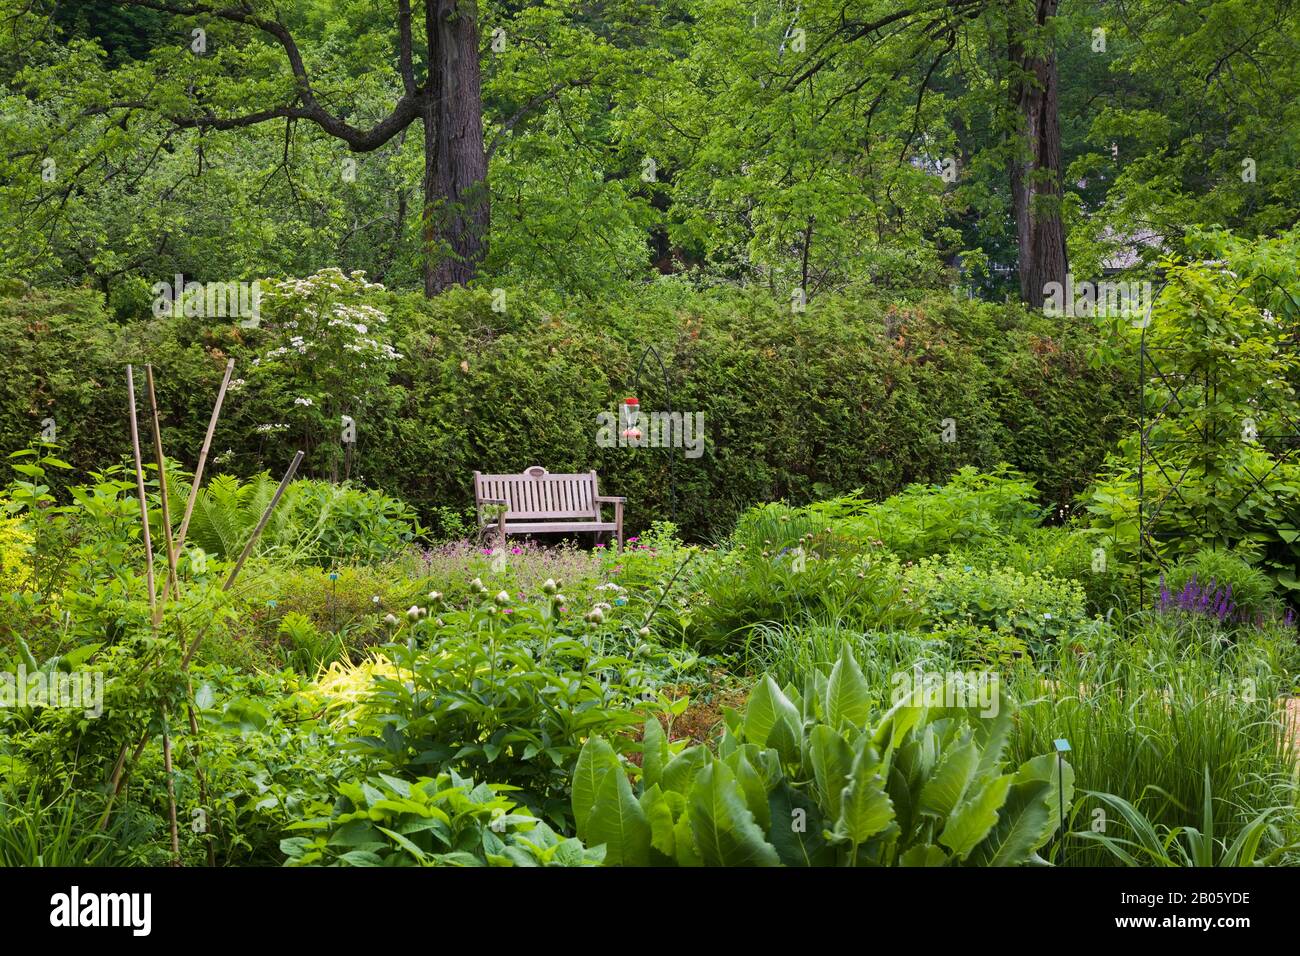 Mixed perennial plants and flowers including Paeonia - Peony, Pteridophyta - Fern in border, high back wooden sitting bench next to Thuja occidentalis. Stock Photo